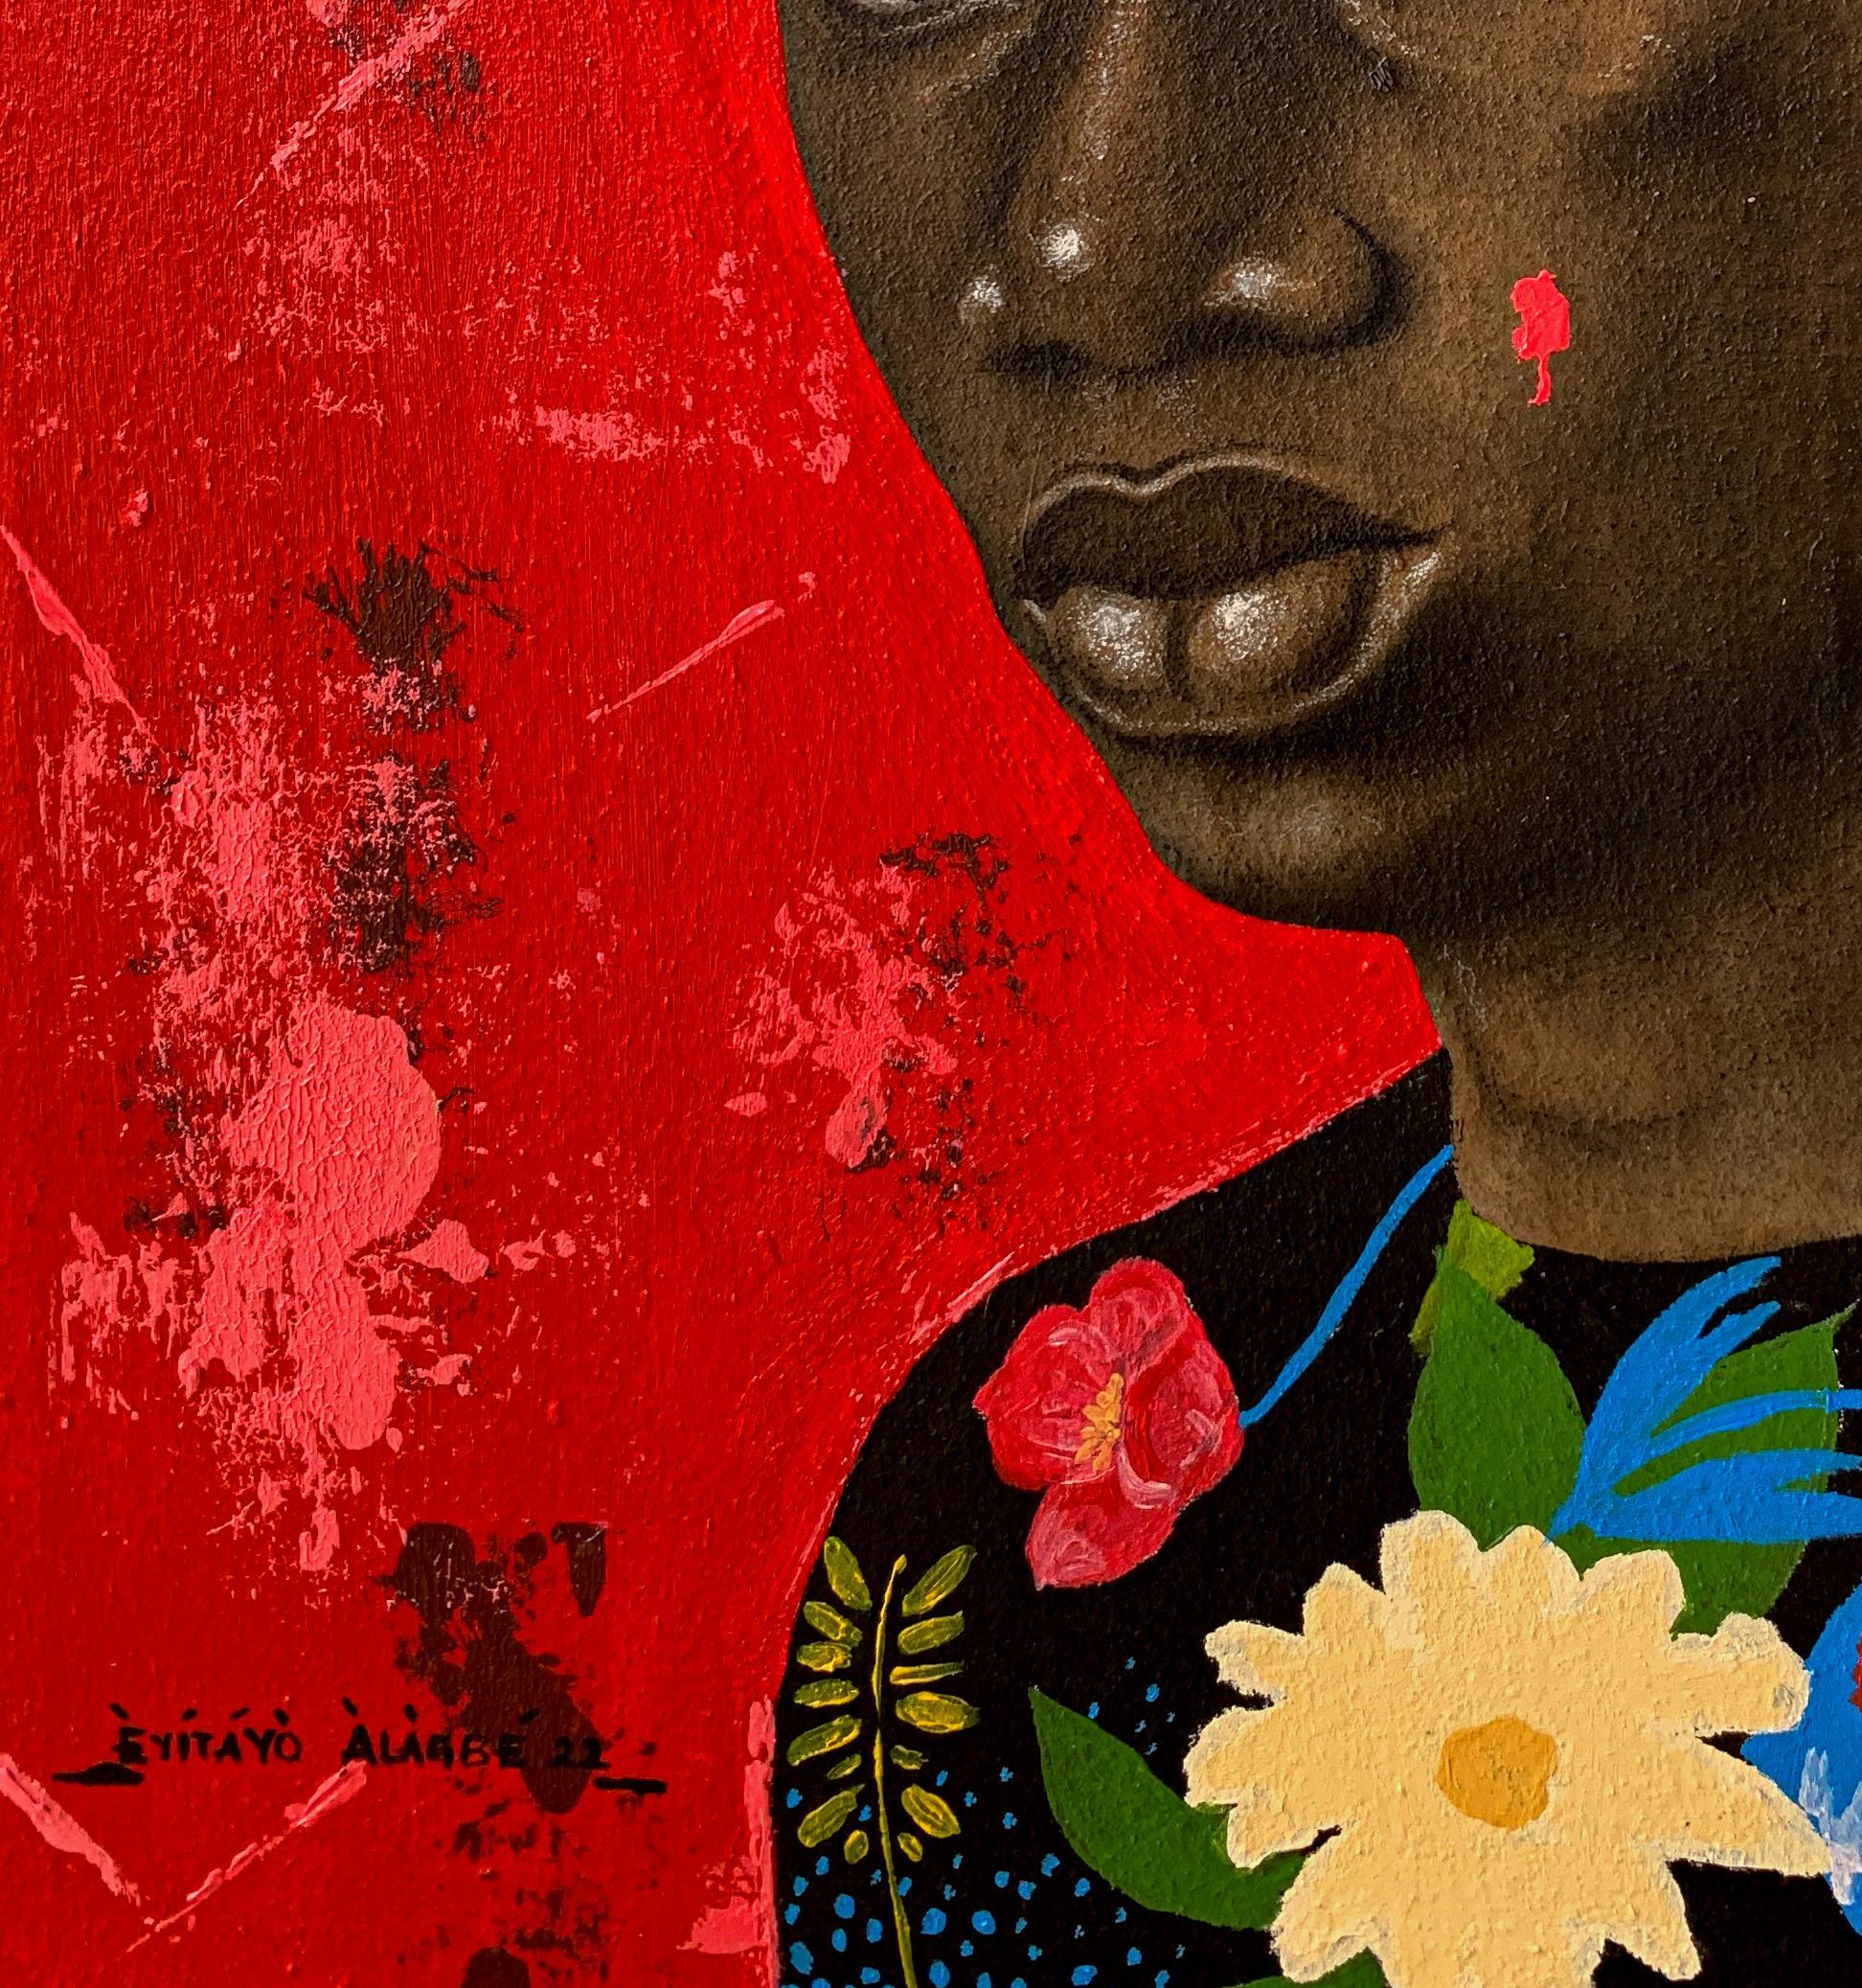 I’m Different 5 - Red Interior Painting by Eyitayo Alagbe 